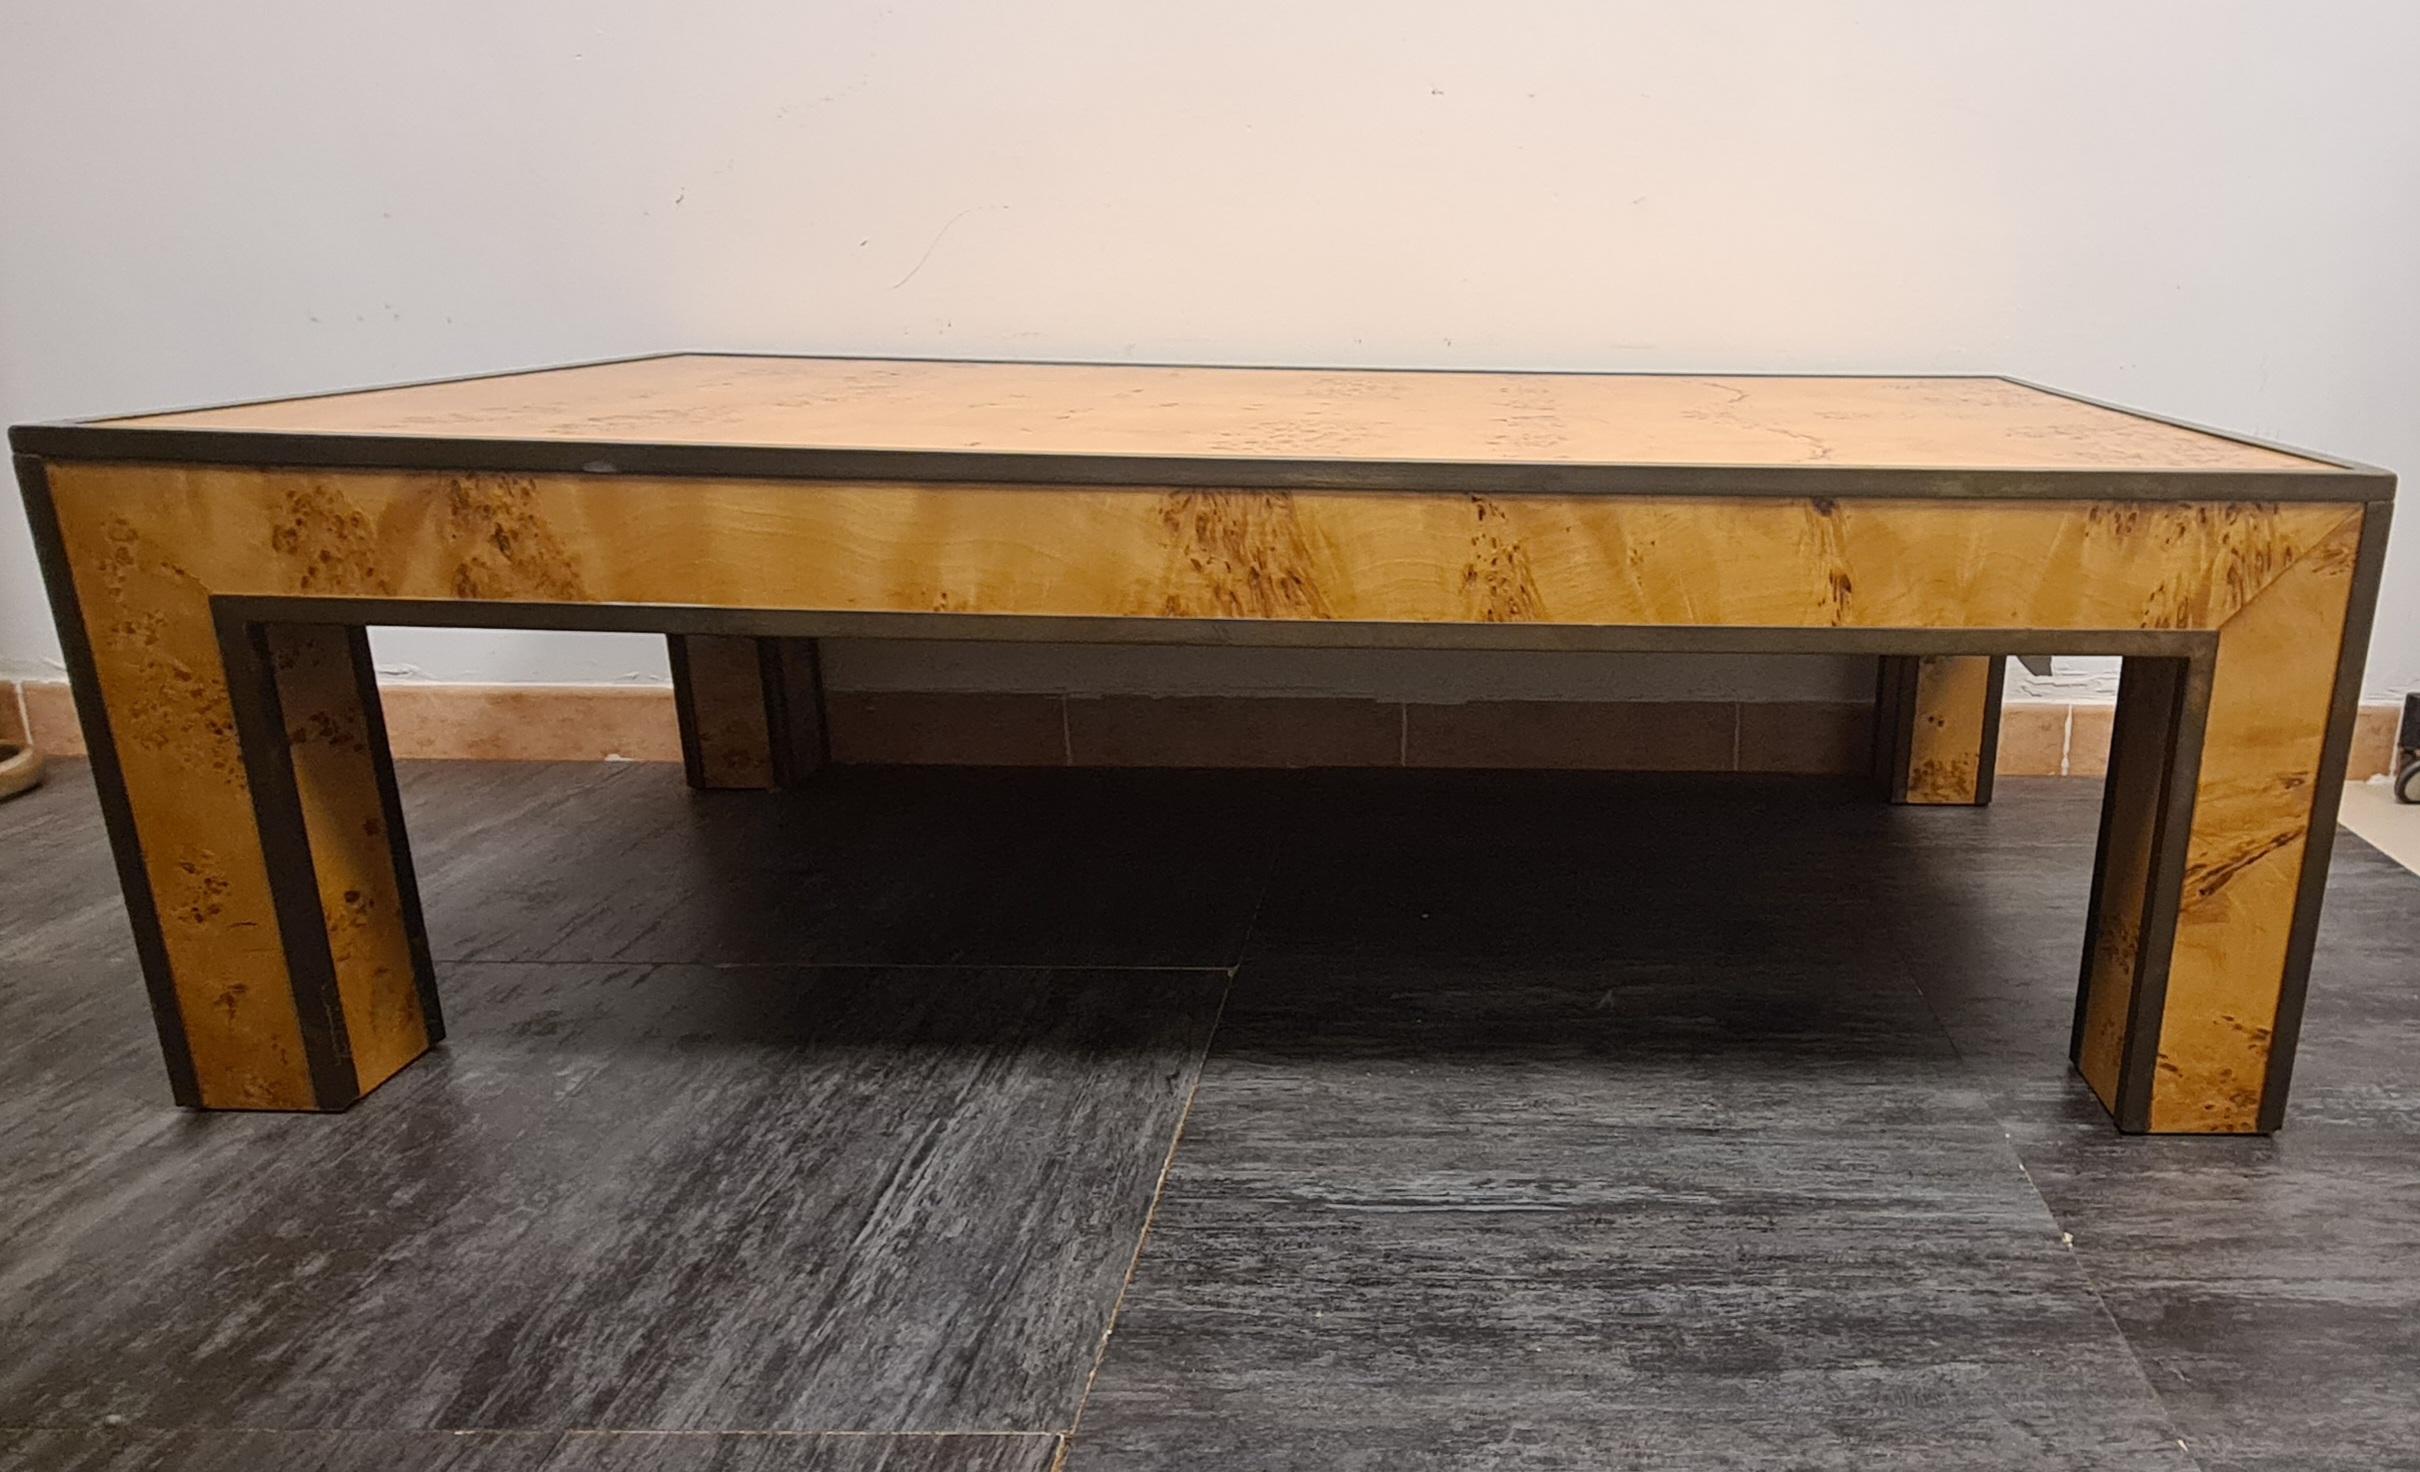 Low coffee table for living room made of briar and brass in the style of Willy Rizzo.

Made of fine materials, wood covered with Elm burl and matted brass.

Ideal for your living room or a waiting room this coffee table made in the 1980s' enjoys the